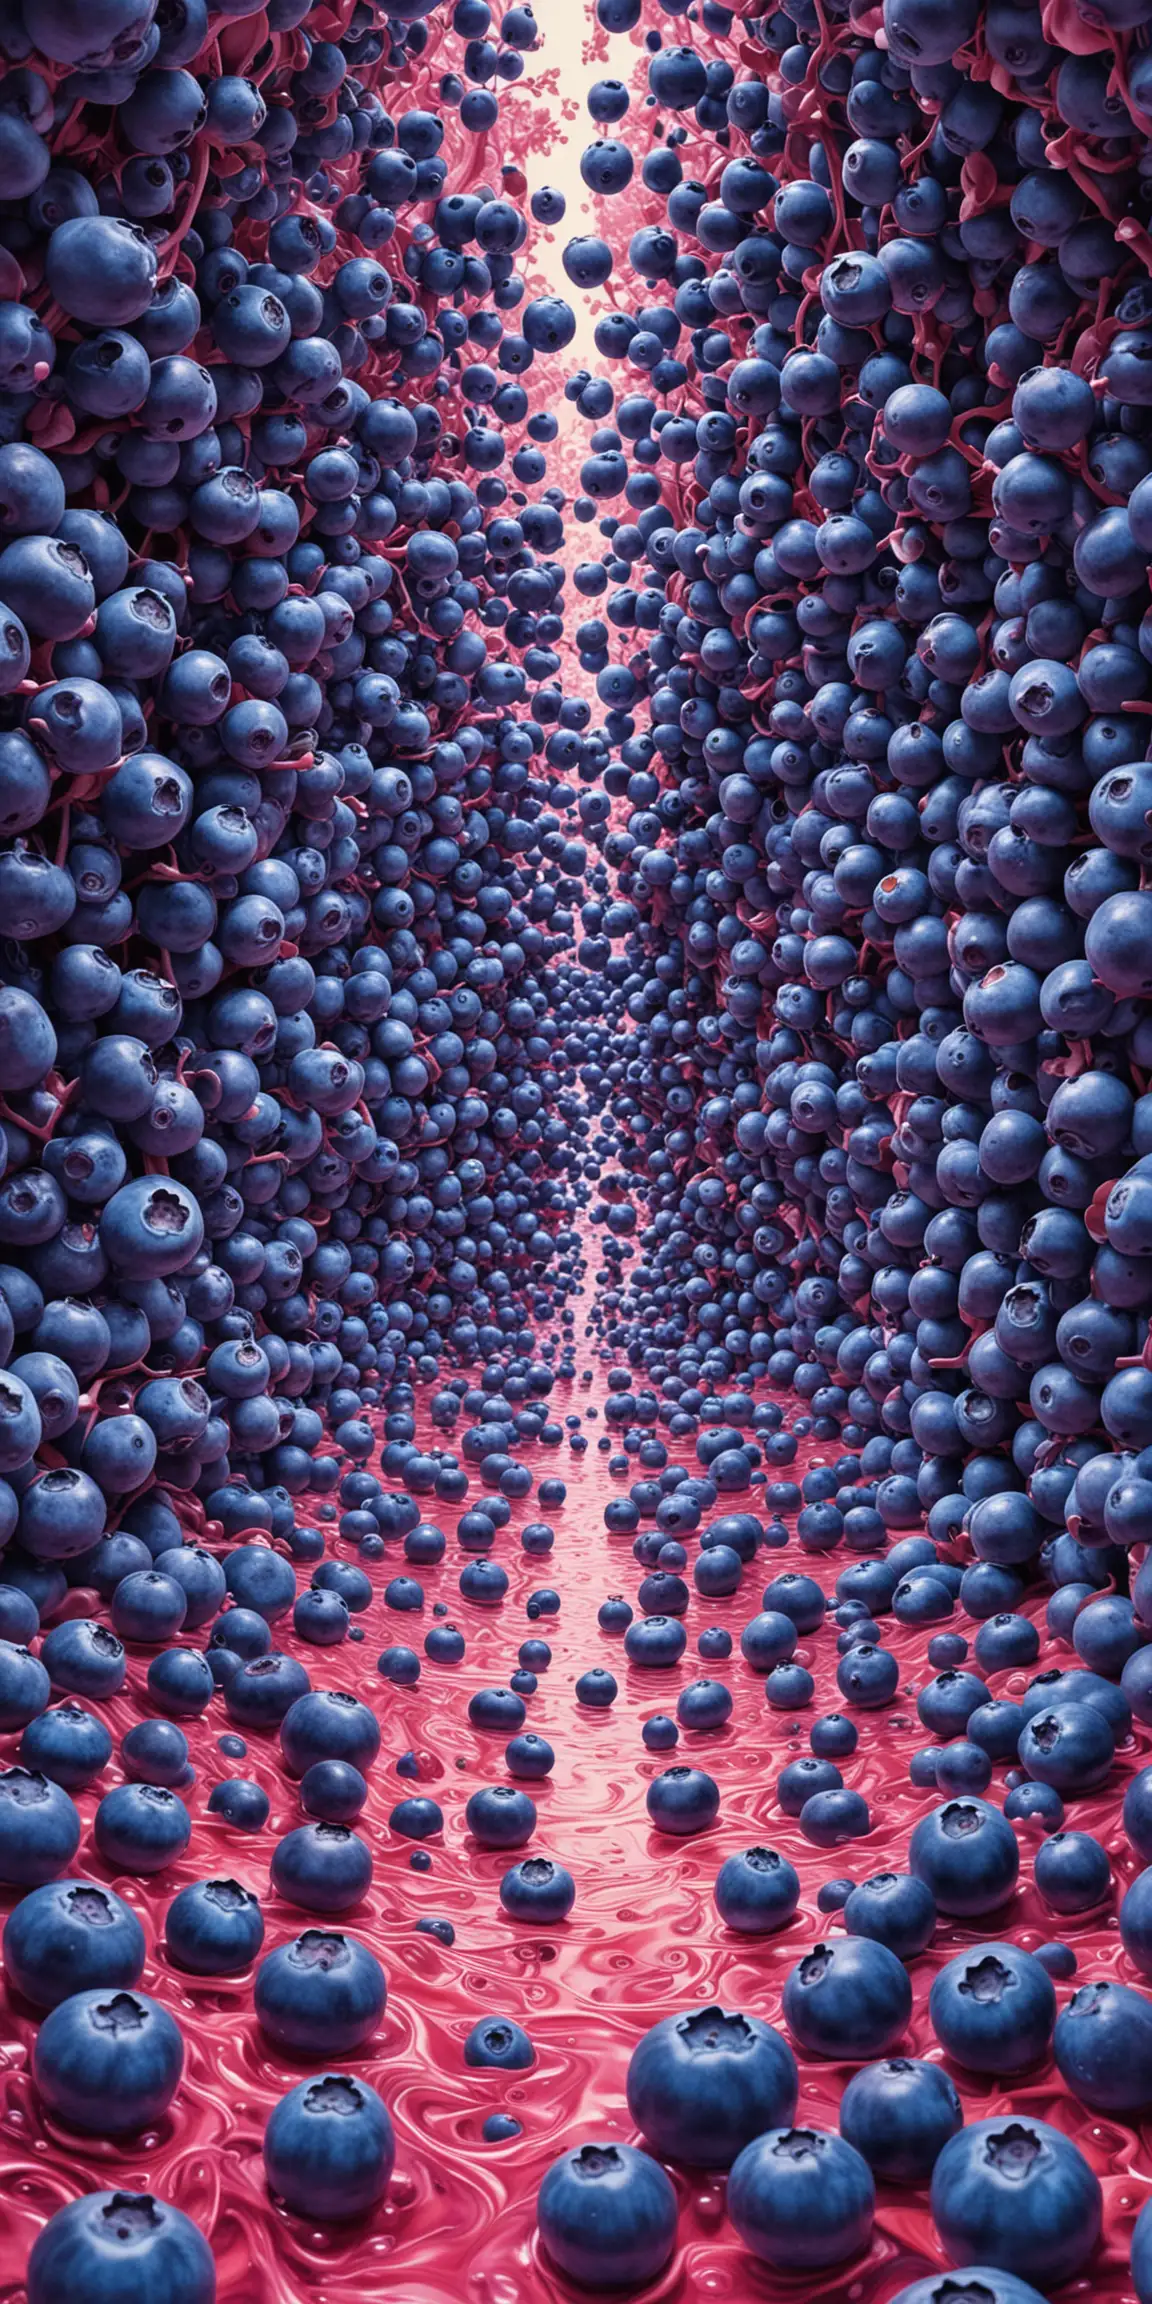 trippy psychedelic artwork of blueberries in a dream